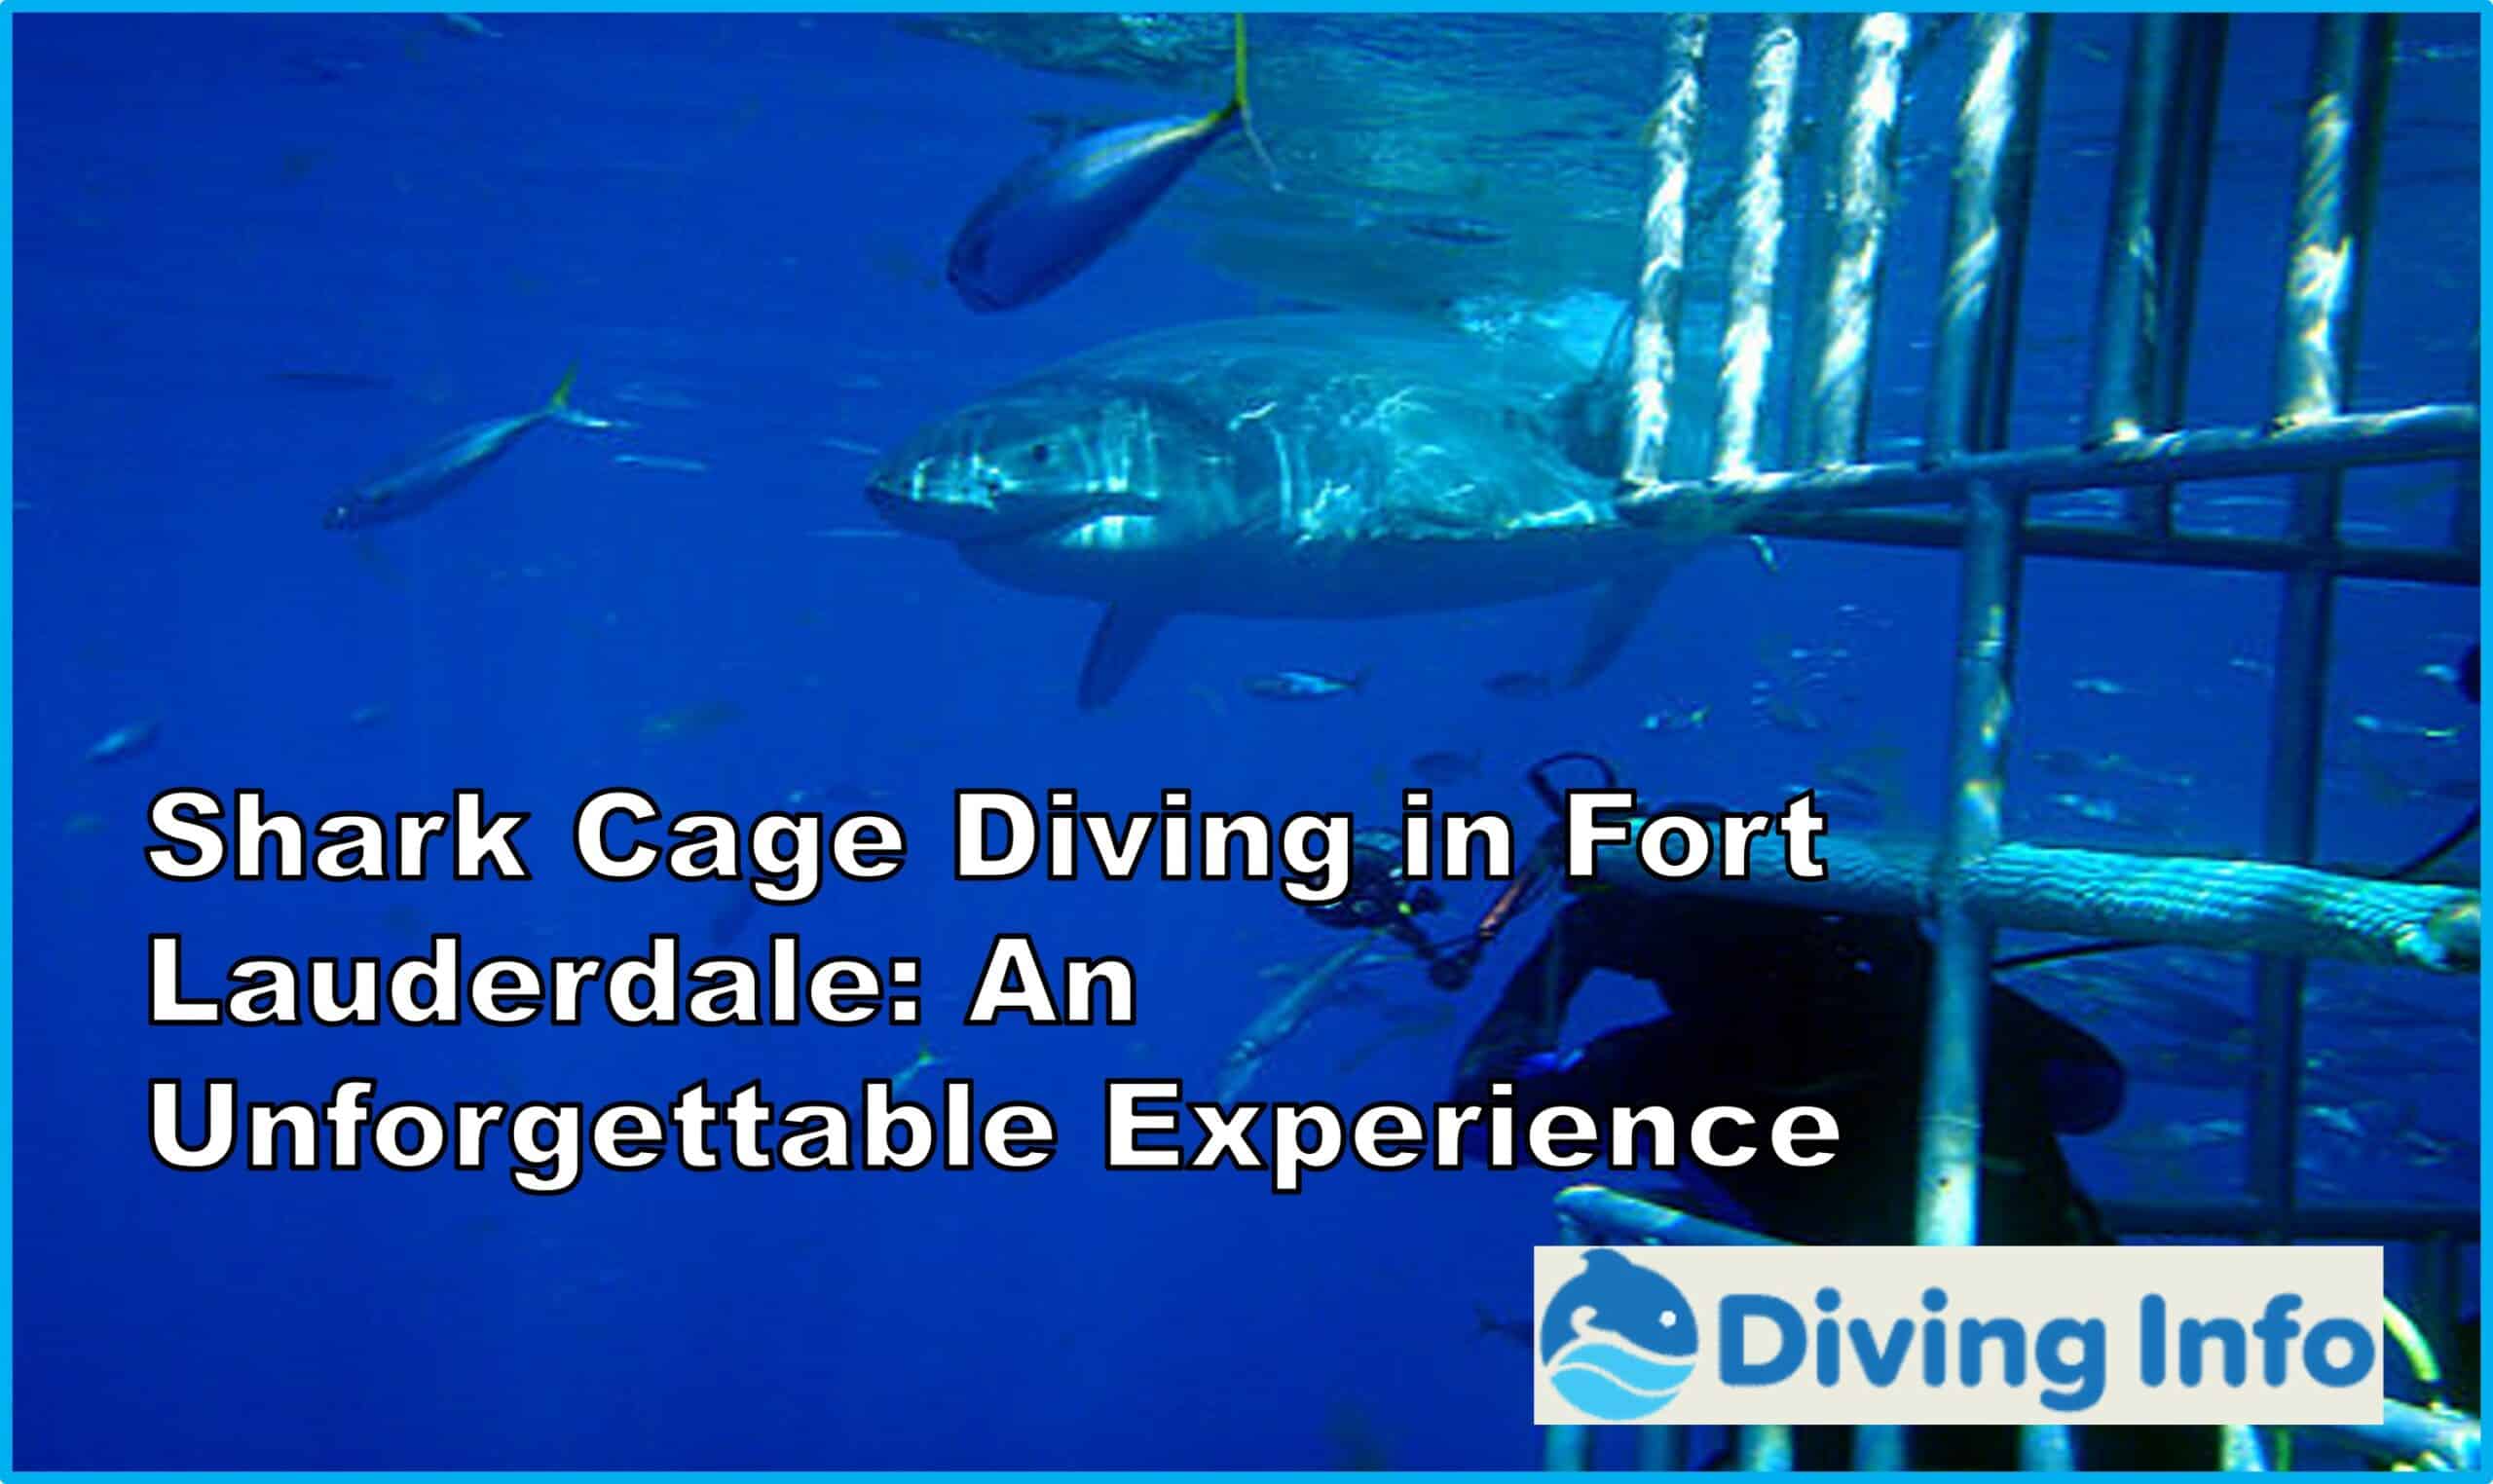 Shark Cage Diving in Fort Lauderdale An Unforgettable Experience